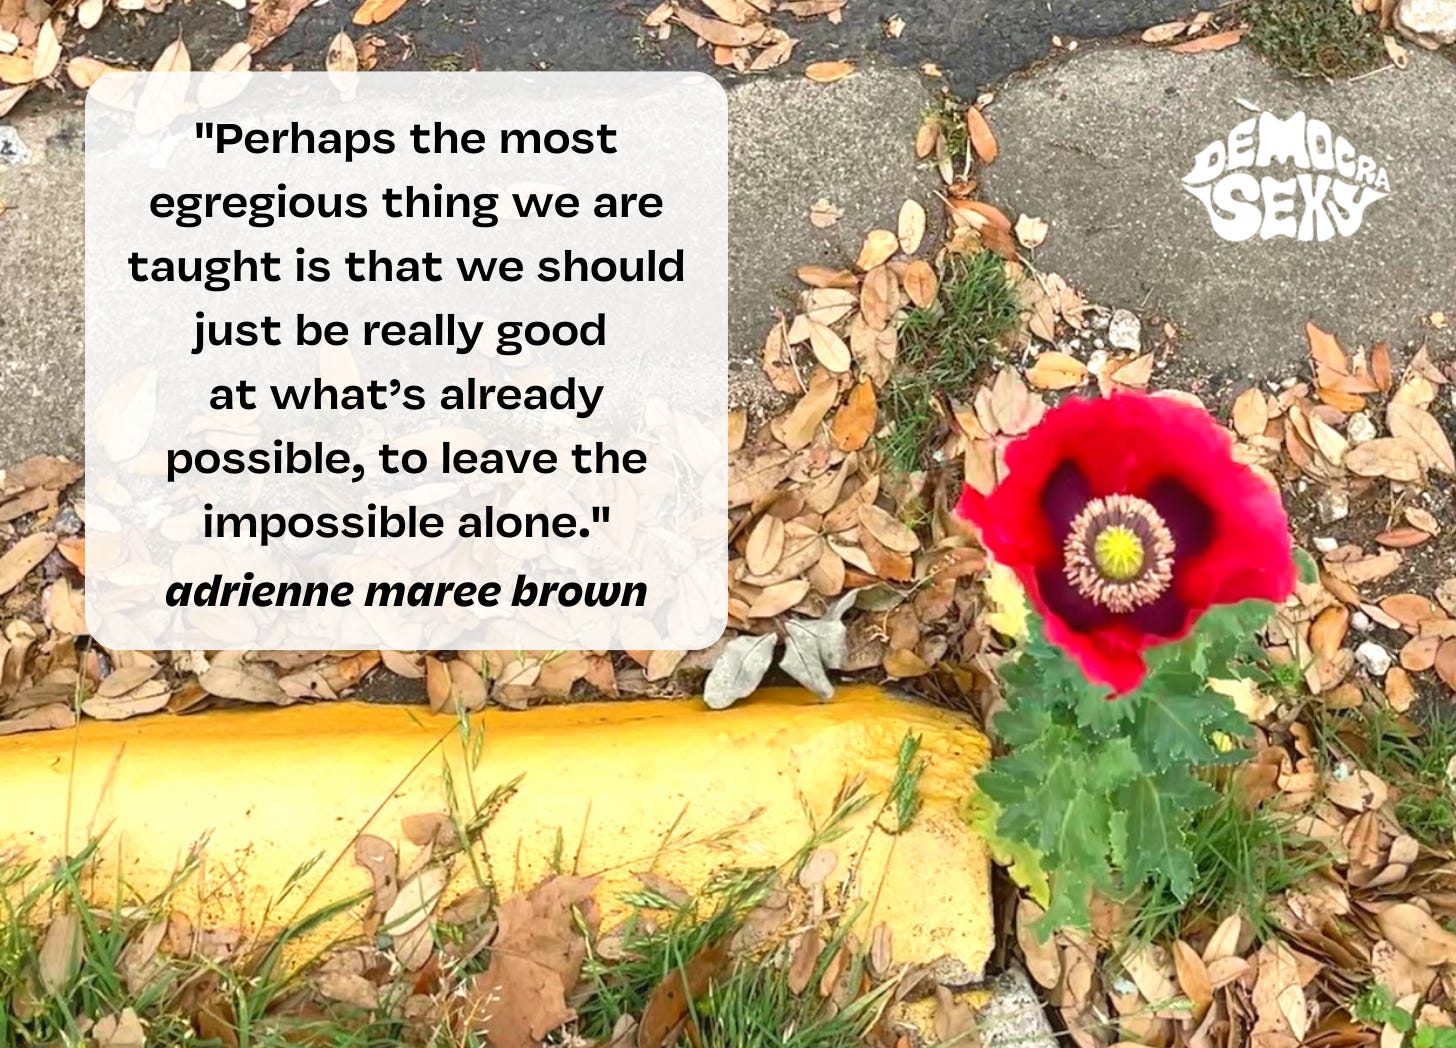 Photo of a bright red poppy growing in a gutter next to a yellow curb. Quote overlayed from adrienne maree brown that says: "Perhaps the most egregious thing we are taught is that we should just be really good at what's already possible, to leave the impossible alone"